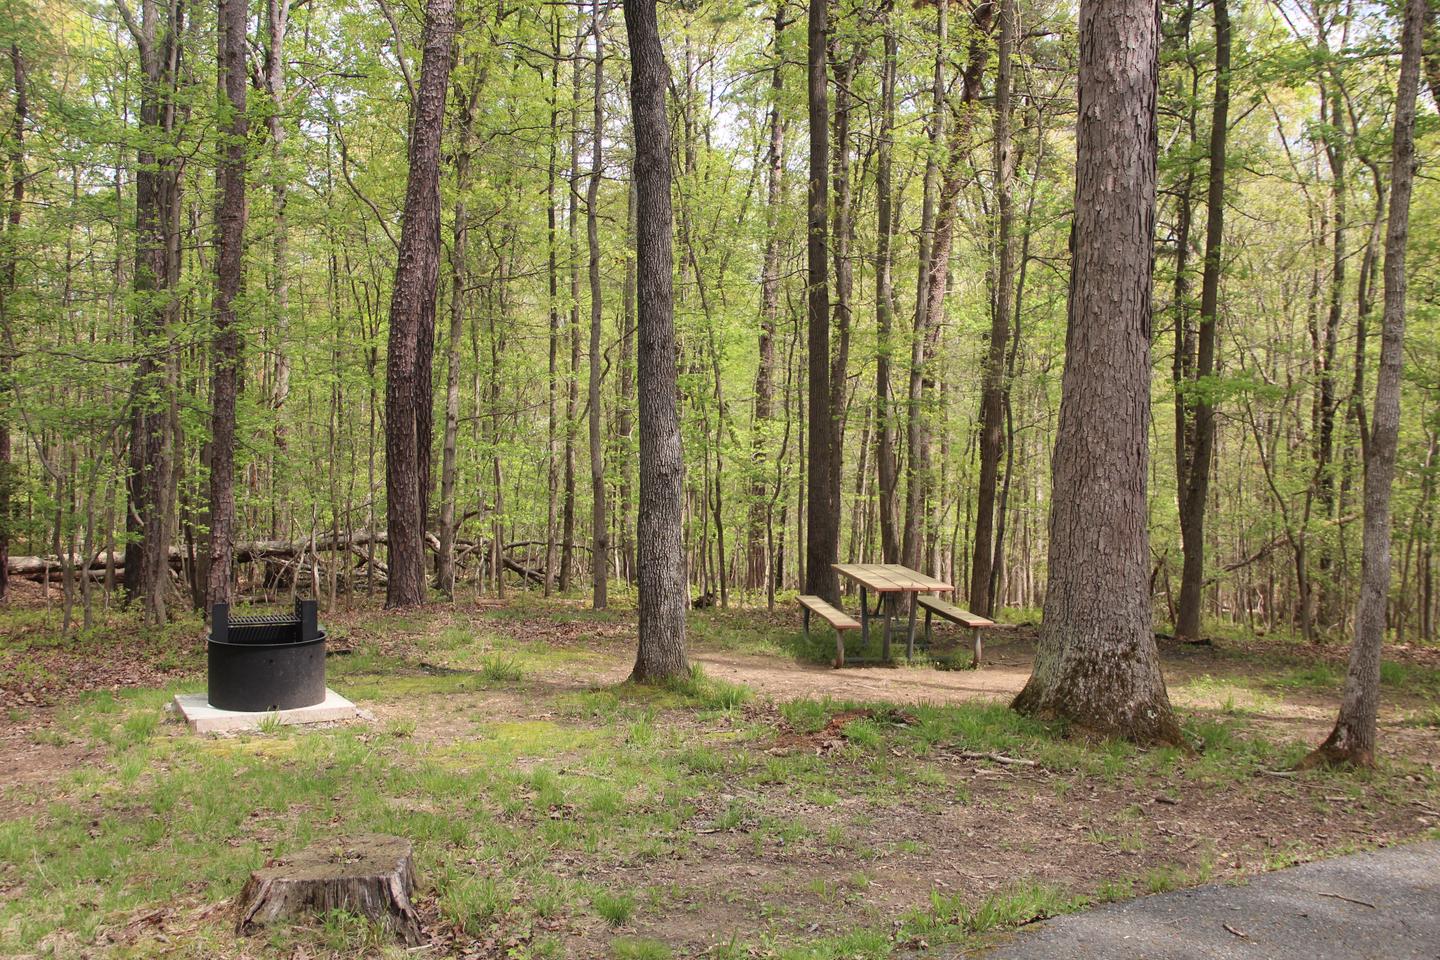 C98 C Loop of the Greenbelt Park Maryland campground